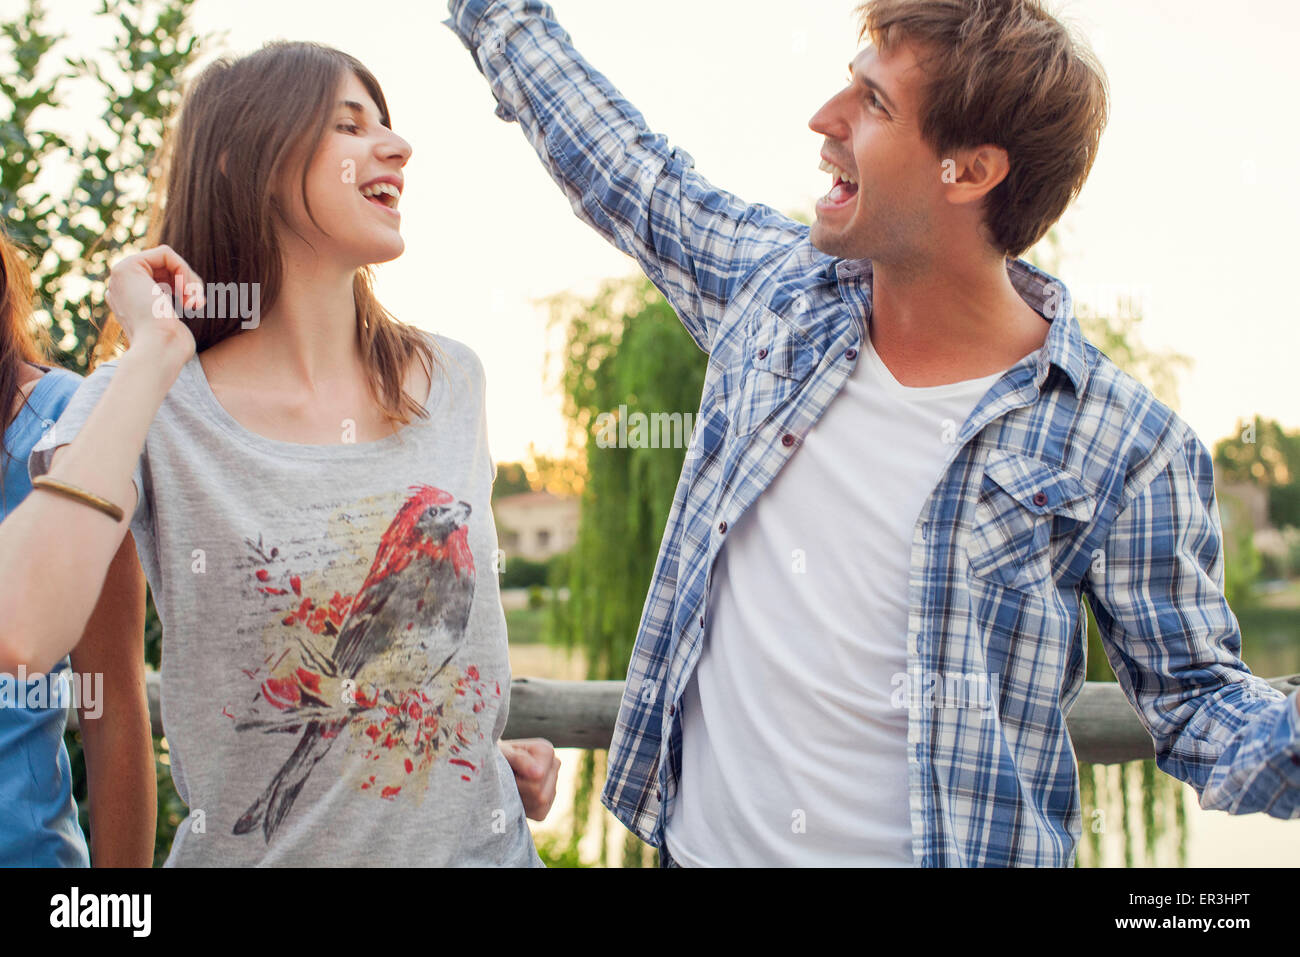 Friends dancing together outdoors Stock Photo